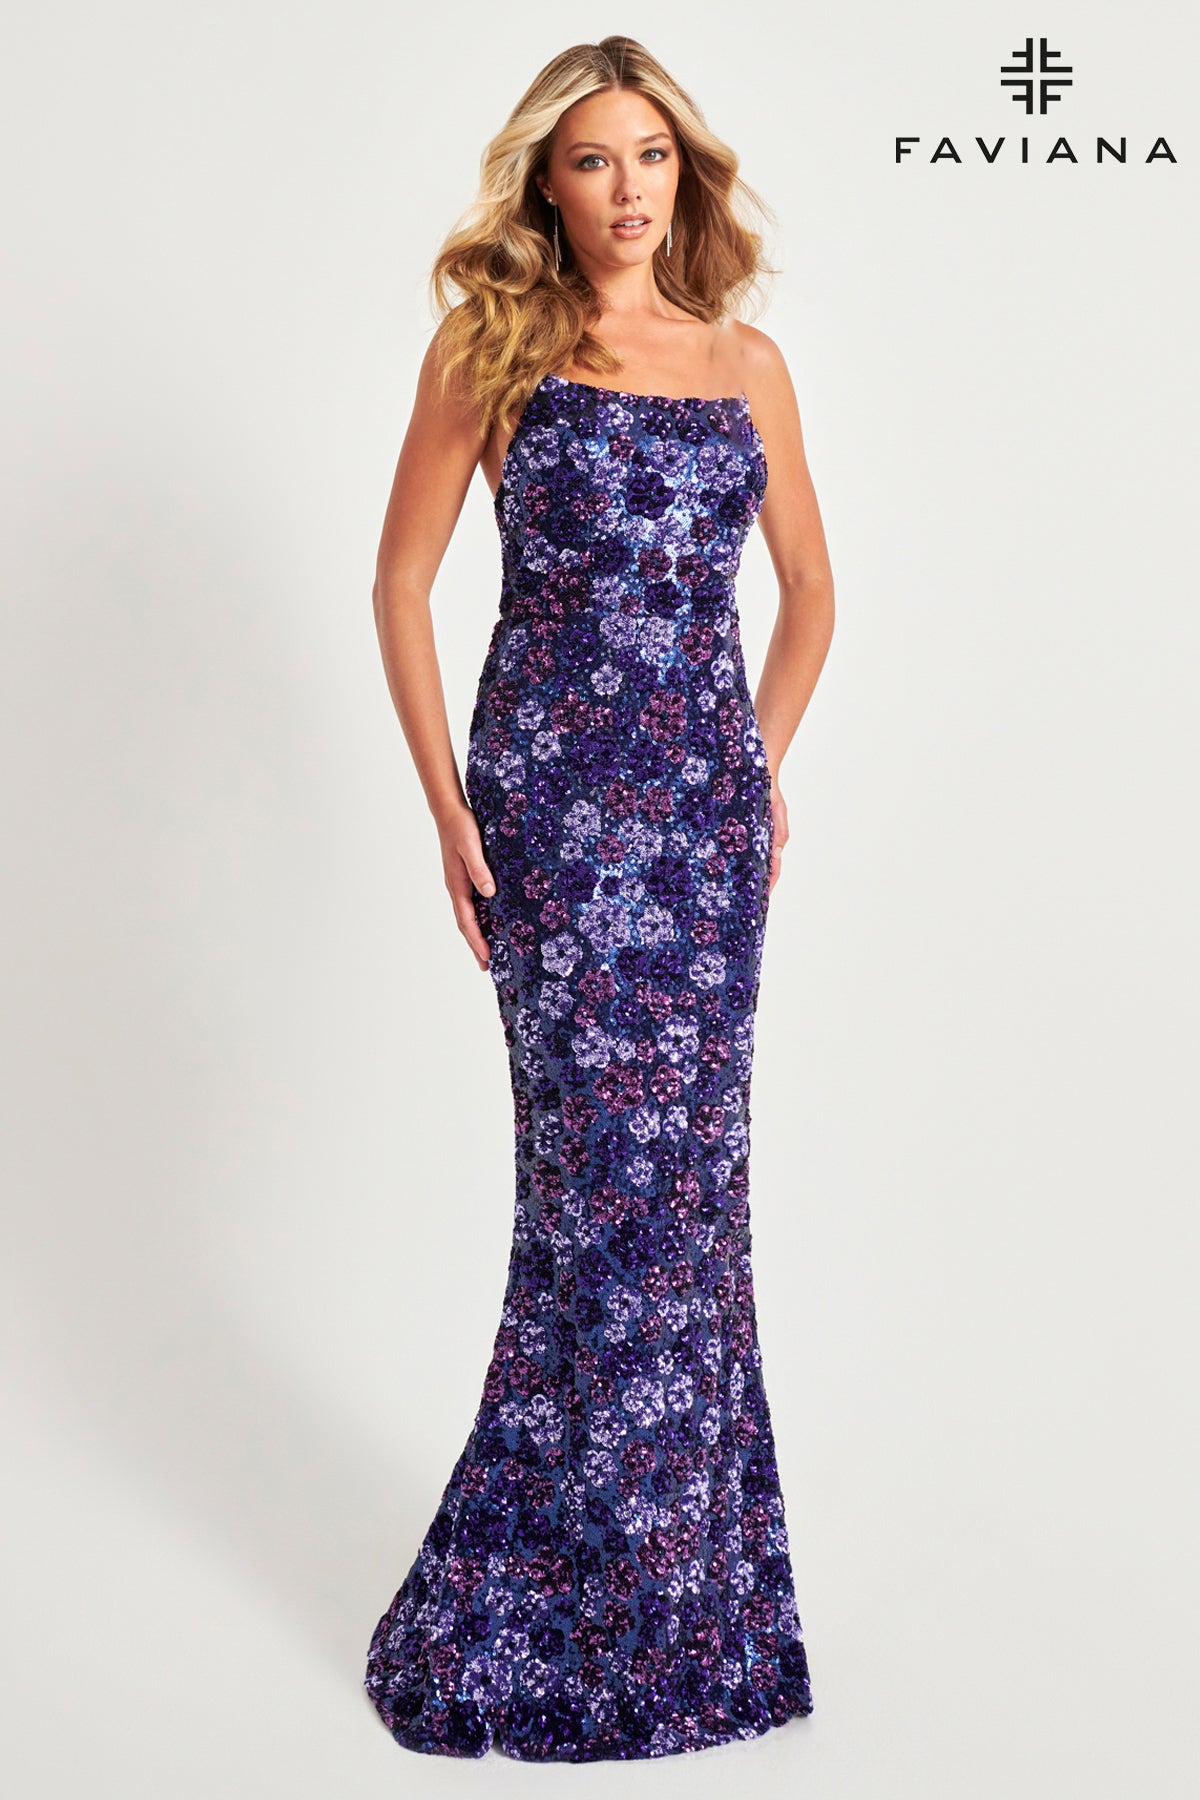 Purple/Navy Strapless Sequin Mermaid Dress With Colorful Floral Design | 11036